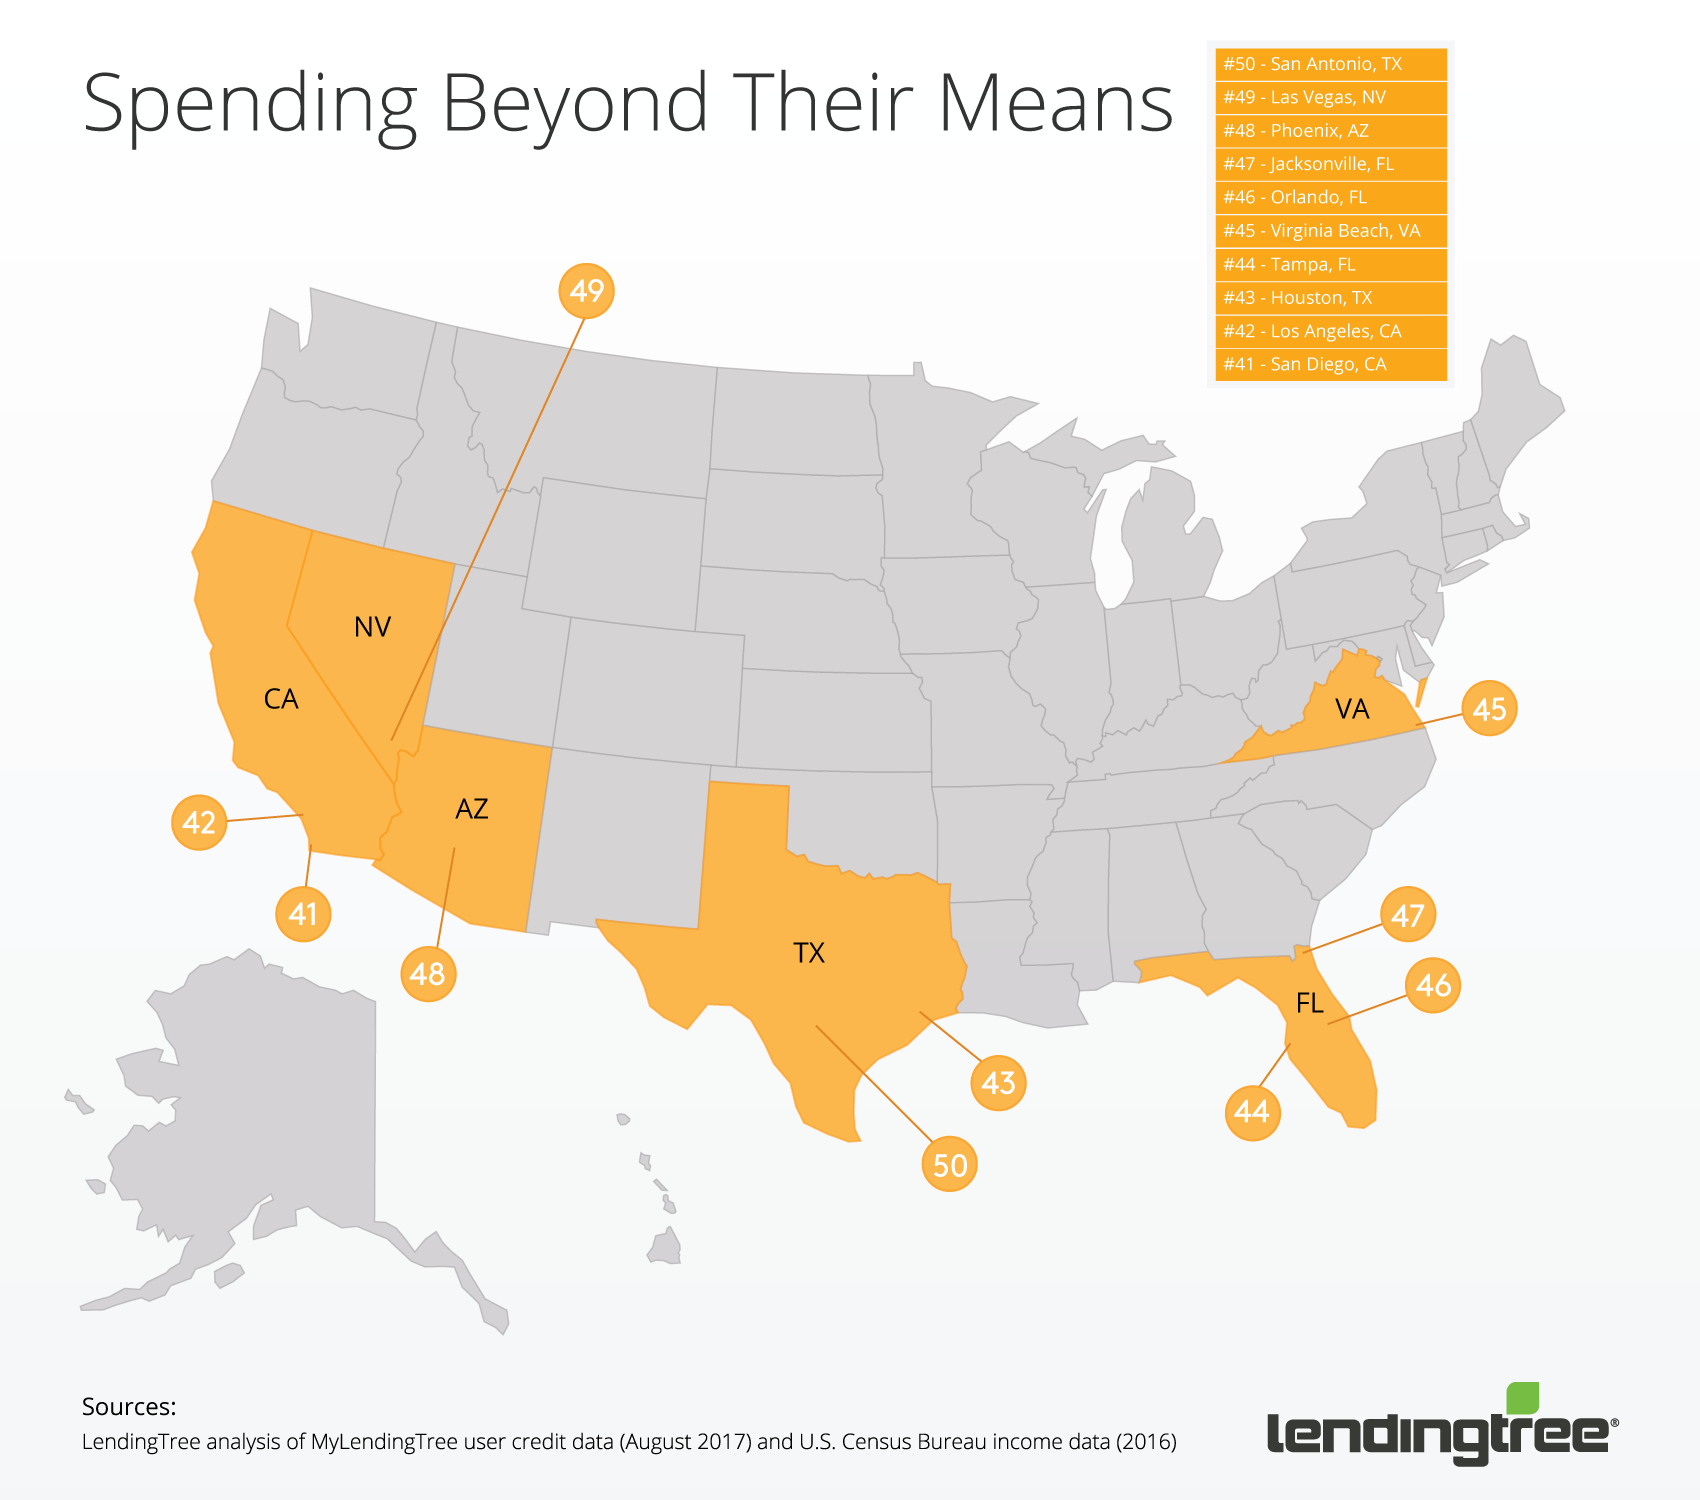 Where residents are spending beyond their means